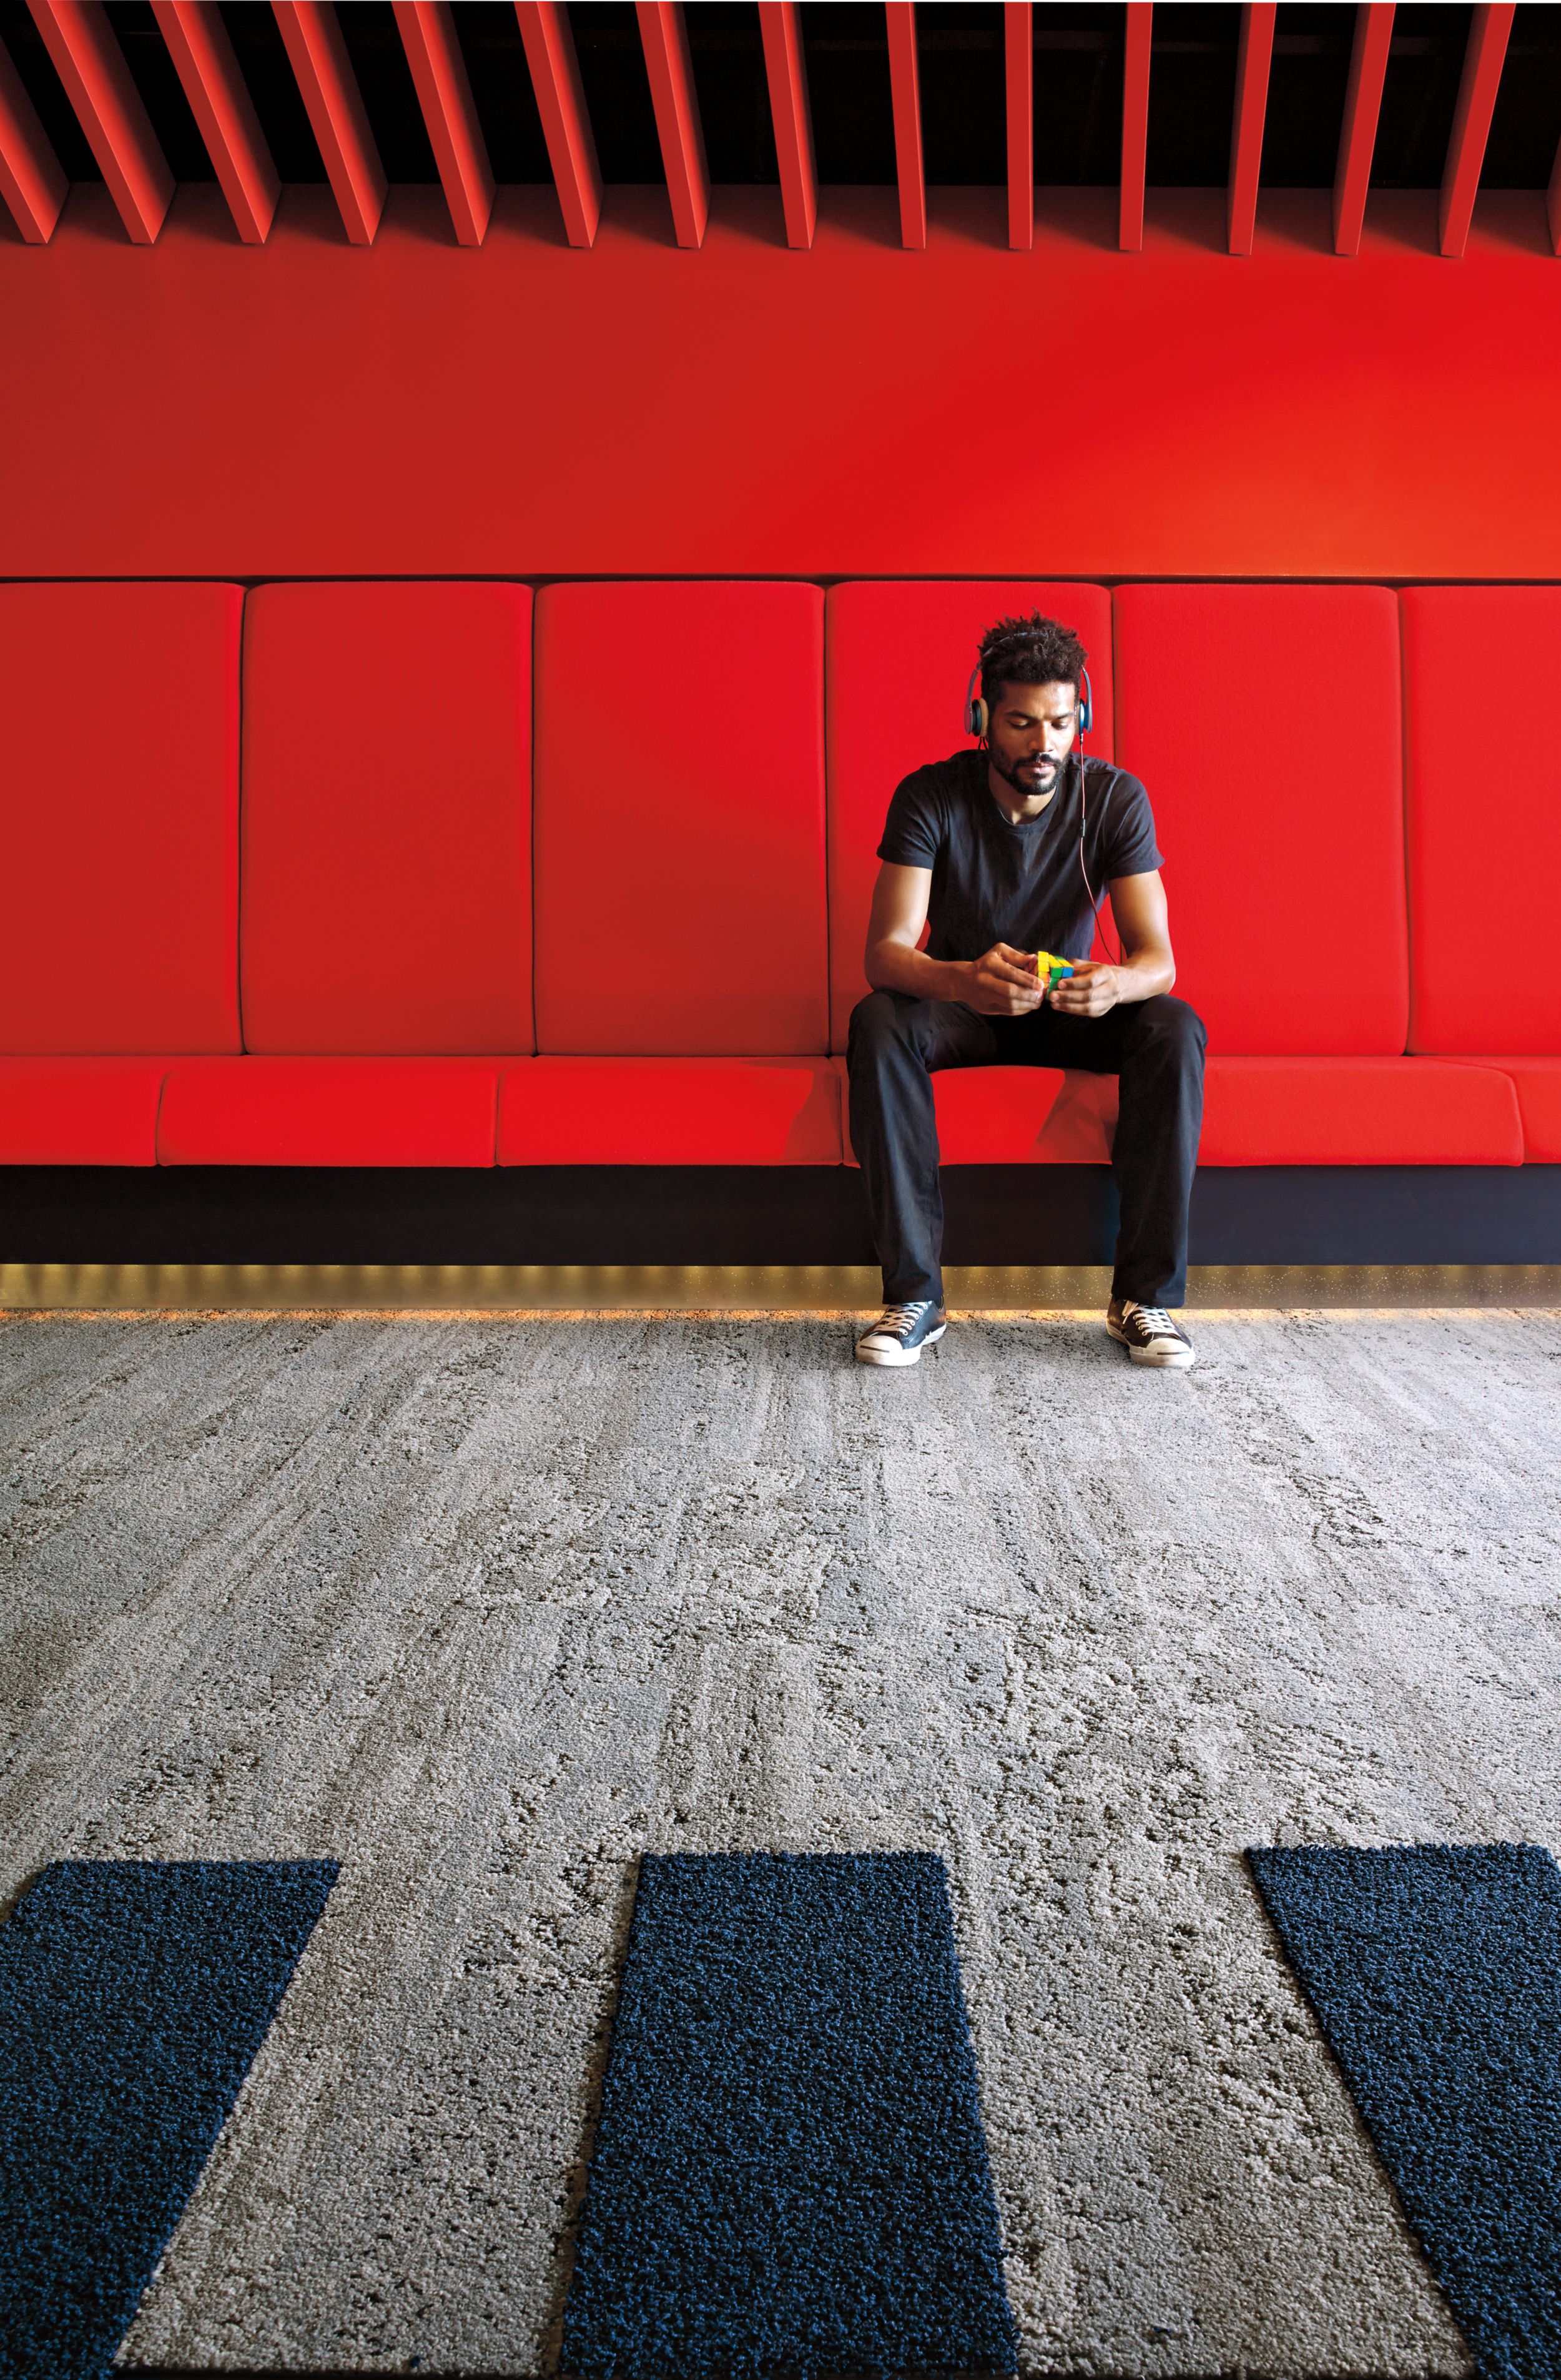 image Interface HN810 plank carpet tile in waiting area with red bench and wall and man listening to music numéro 3